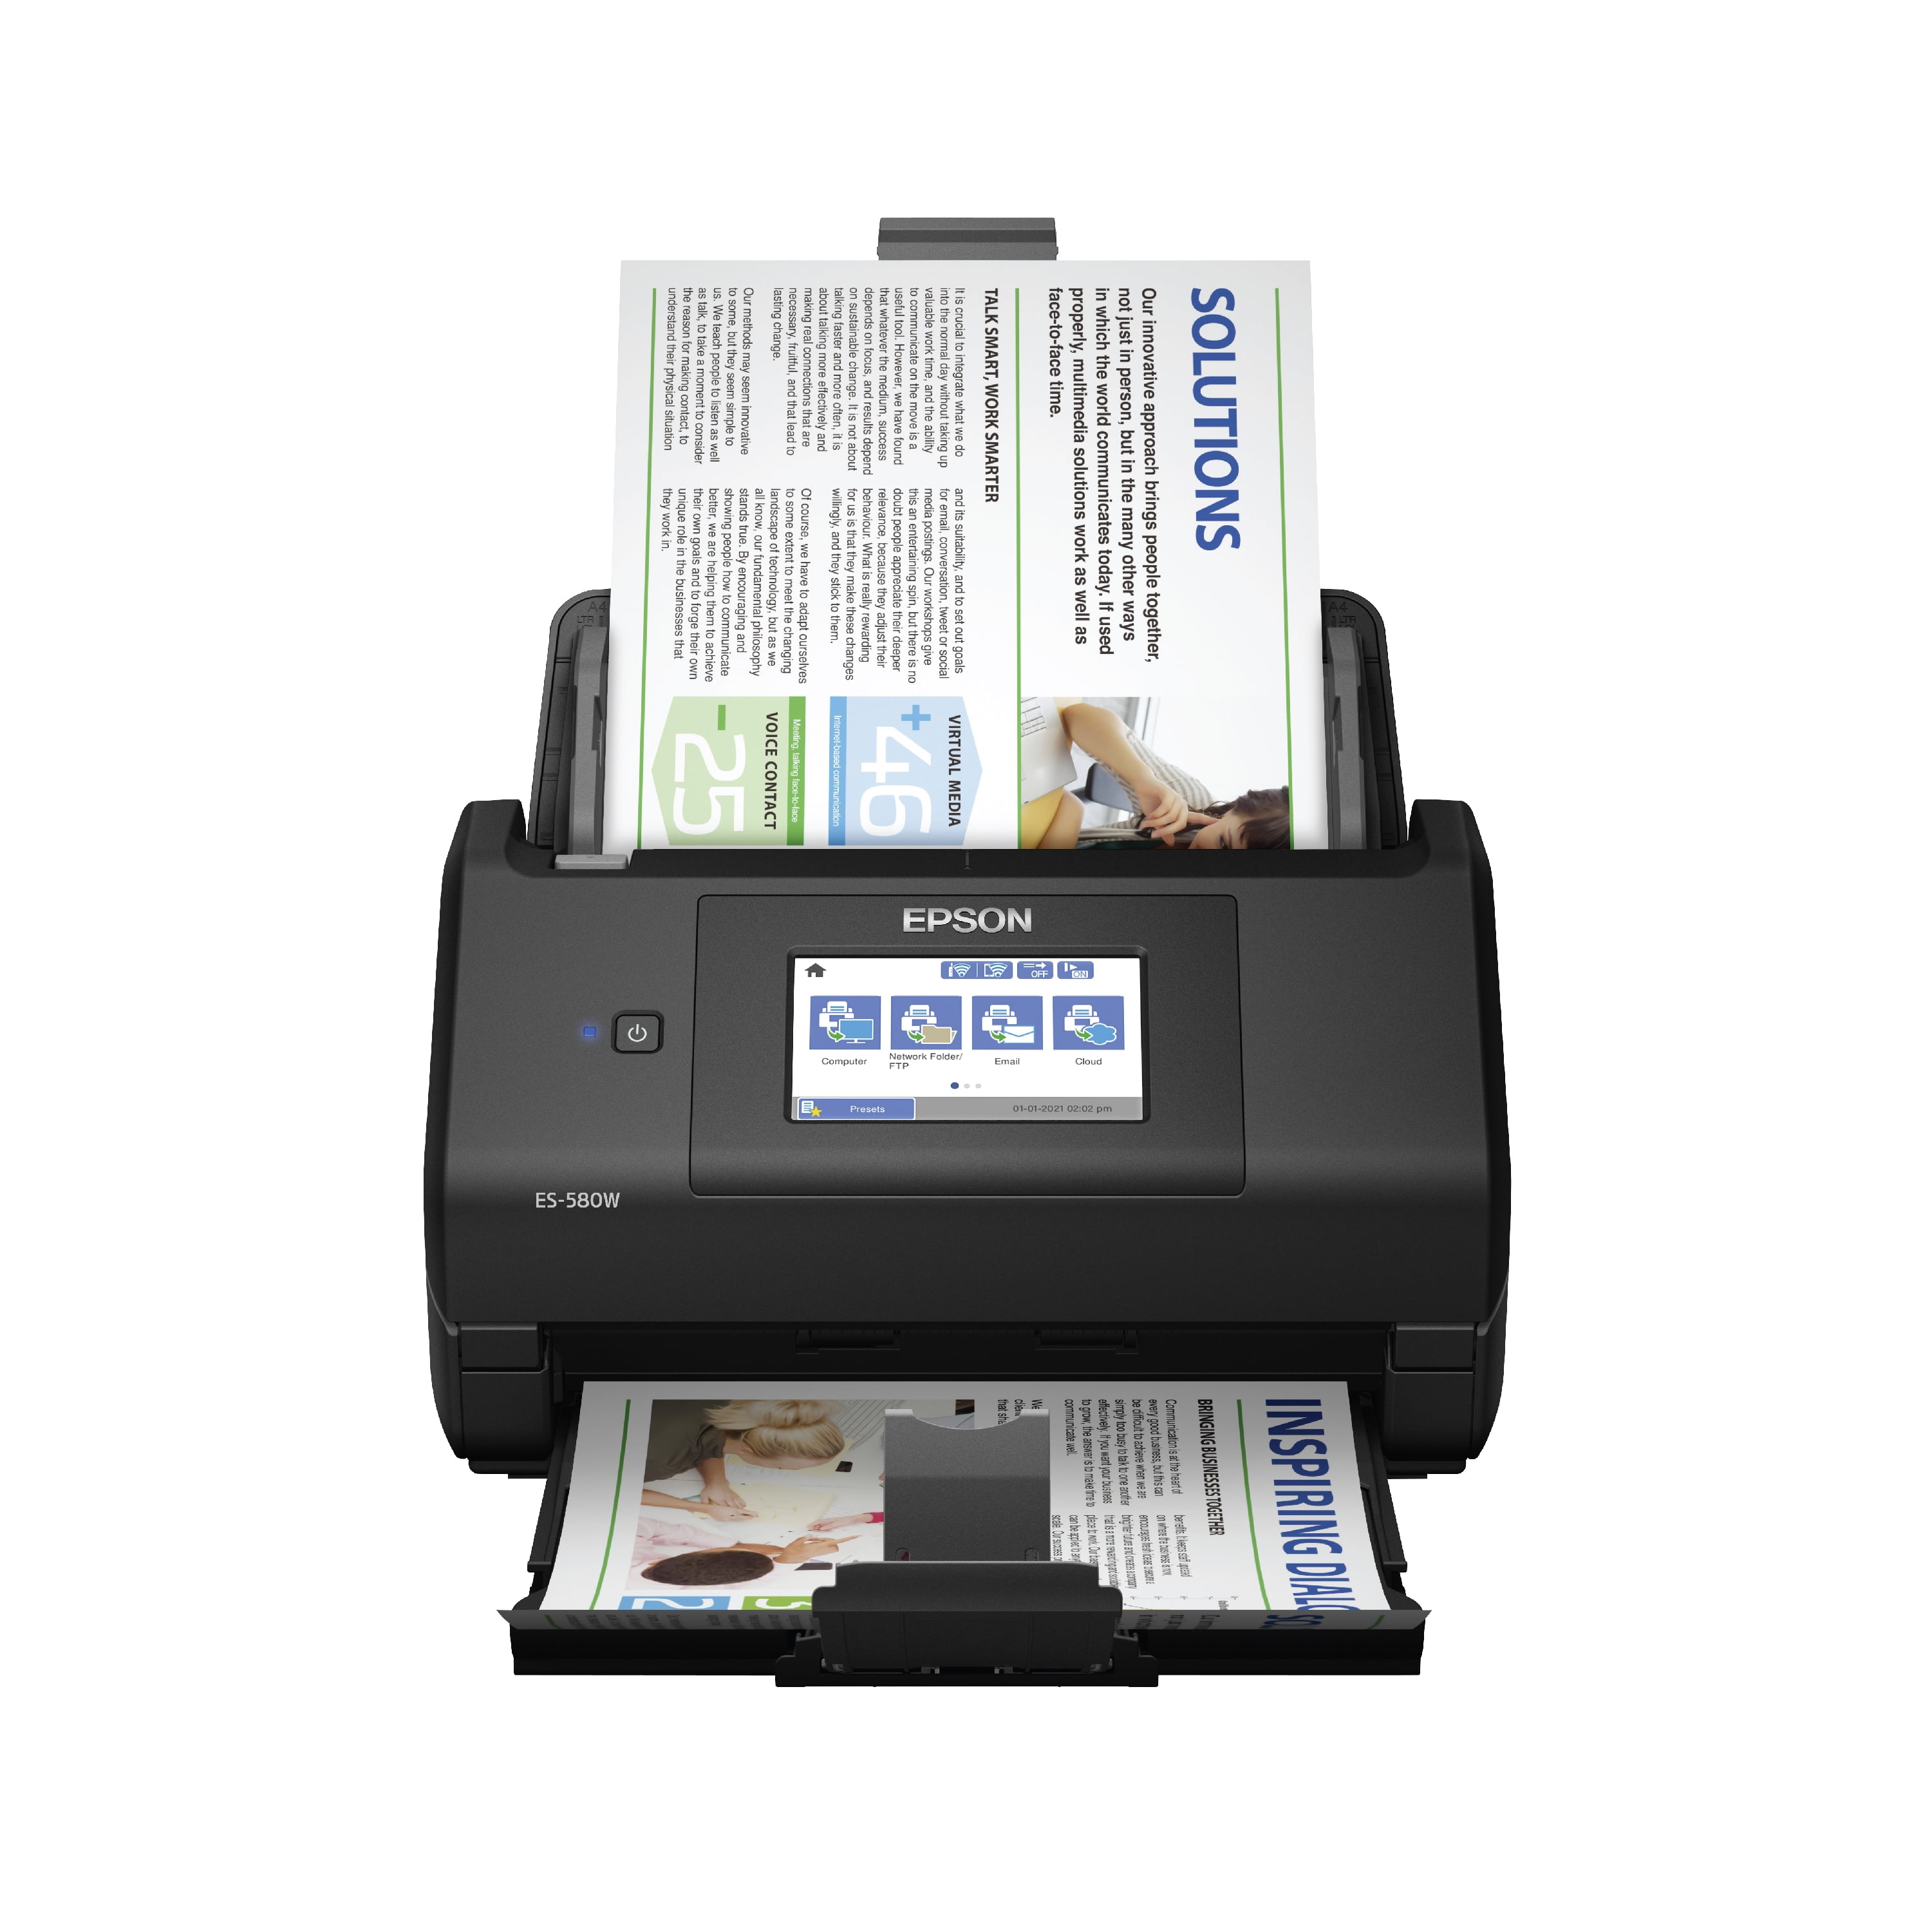 Epson WorkForce ES-580W Wireless Color Duplex Desktop Document Scanner for  PC and Mac with 100-sheet Auto Document Feeder (ADF) and Intuitive 4.3  Touchscreen 